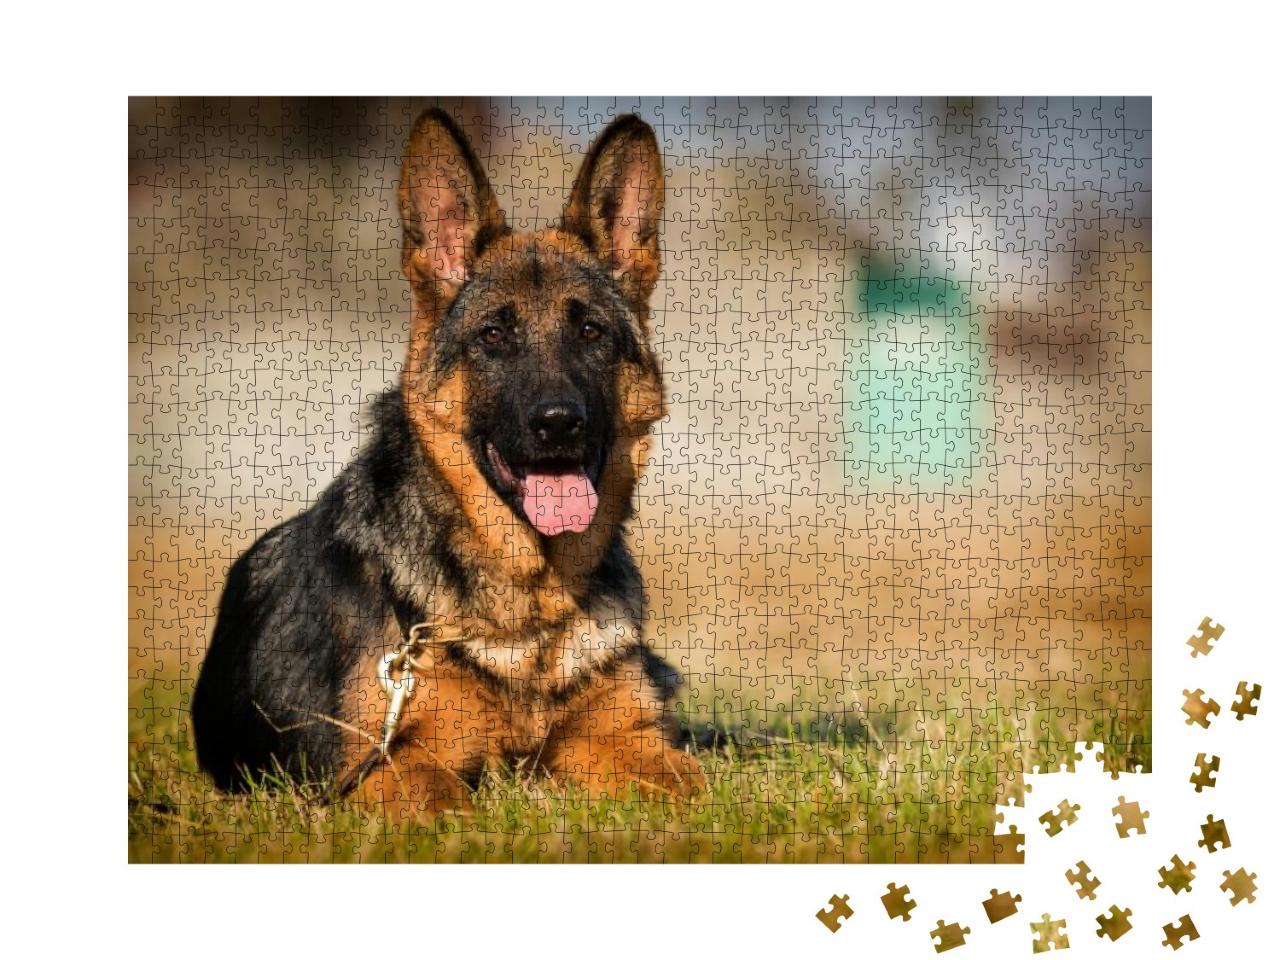 German Shepherd Puppy Age 5 Months in the Grass... Jigsaw Puzzle with 1000 pieces